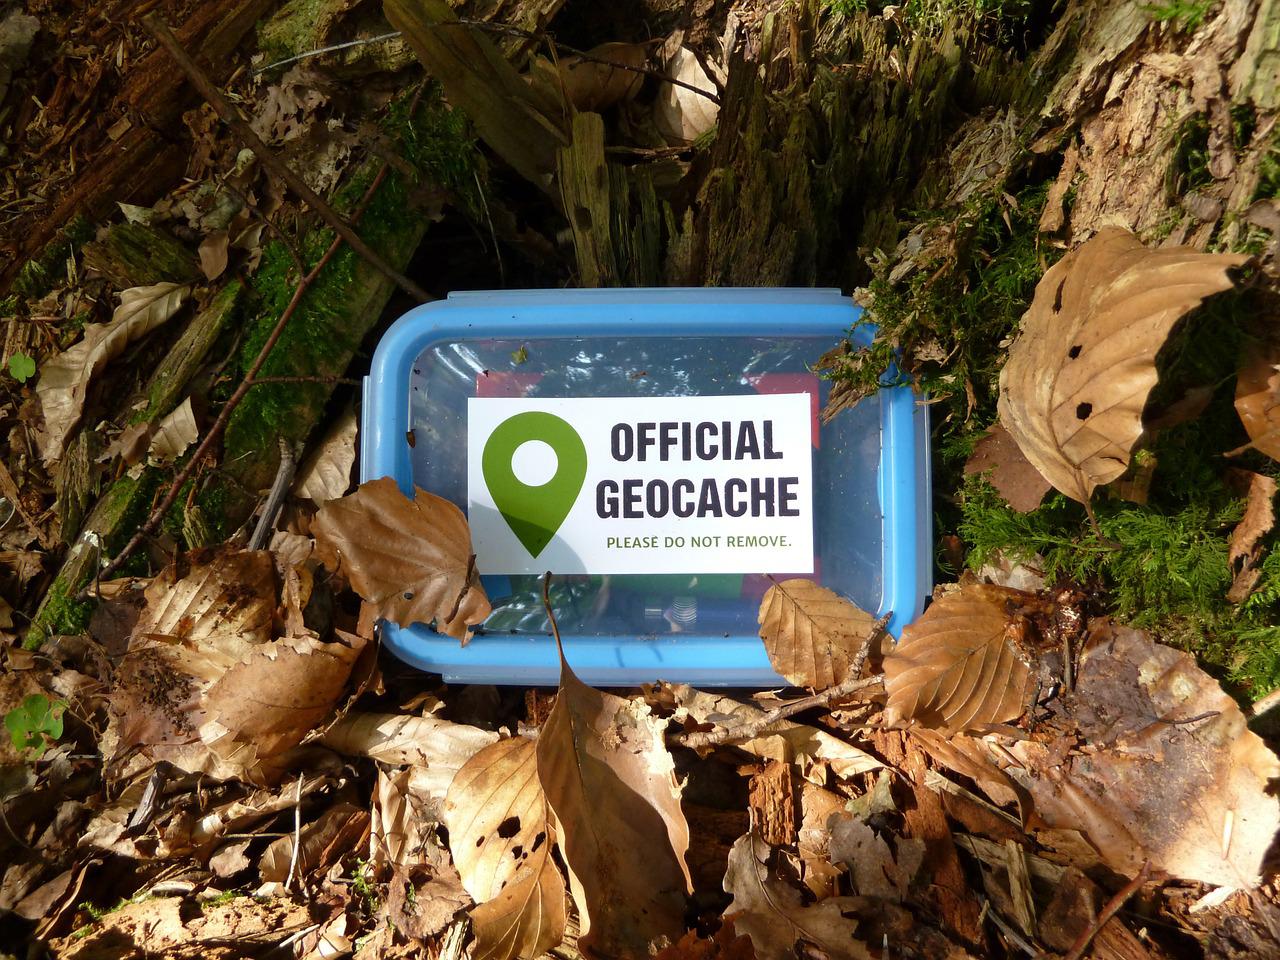 Photo of a geocache (labeled "Official Geocache") sitting on the ground surrounded by fallen leaves.